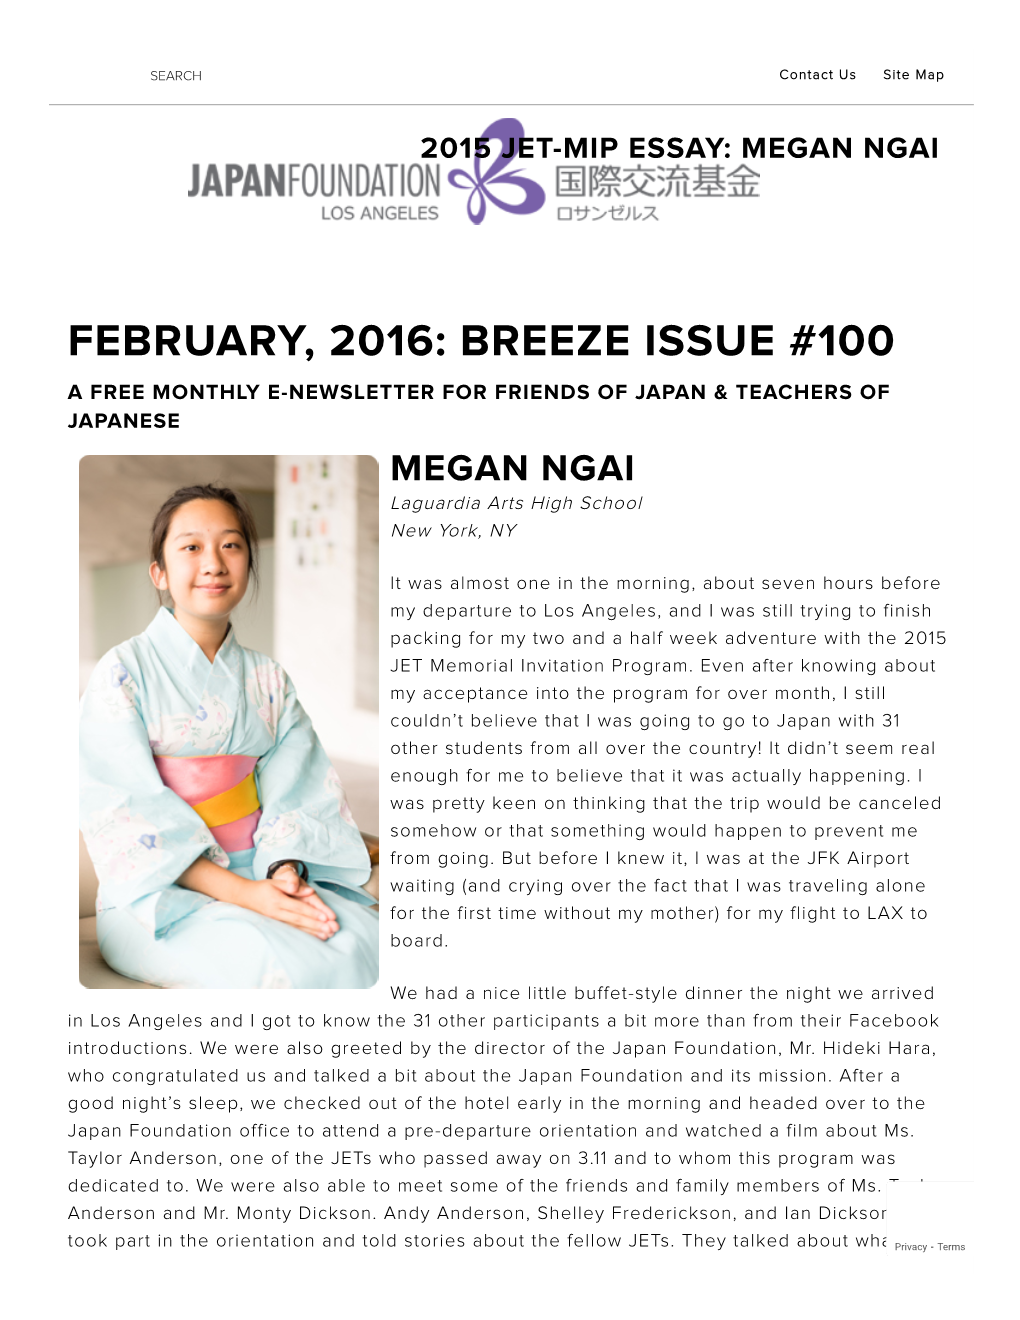 BREEZE ISSUE #100 a FREE MONTHLY E-NEWSLETTER for FRIENDS of JAPAN & TEACHERS of JAPANESE MEGAN NGAI Laguardia Arts High School New York, NY